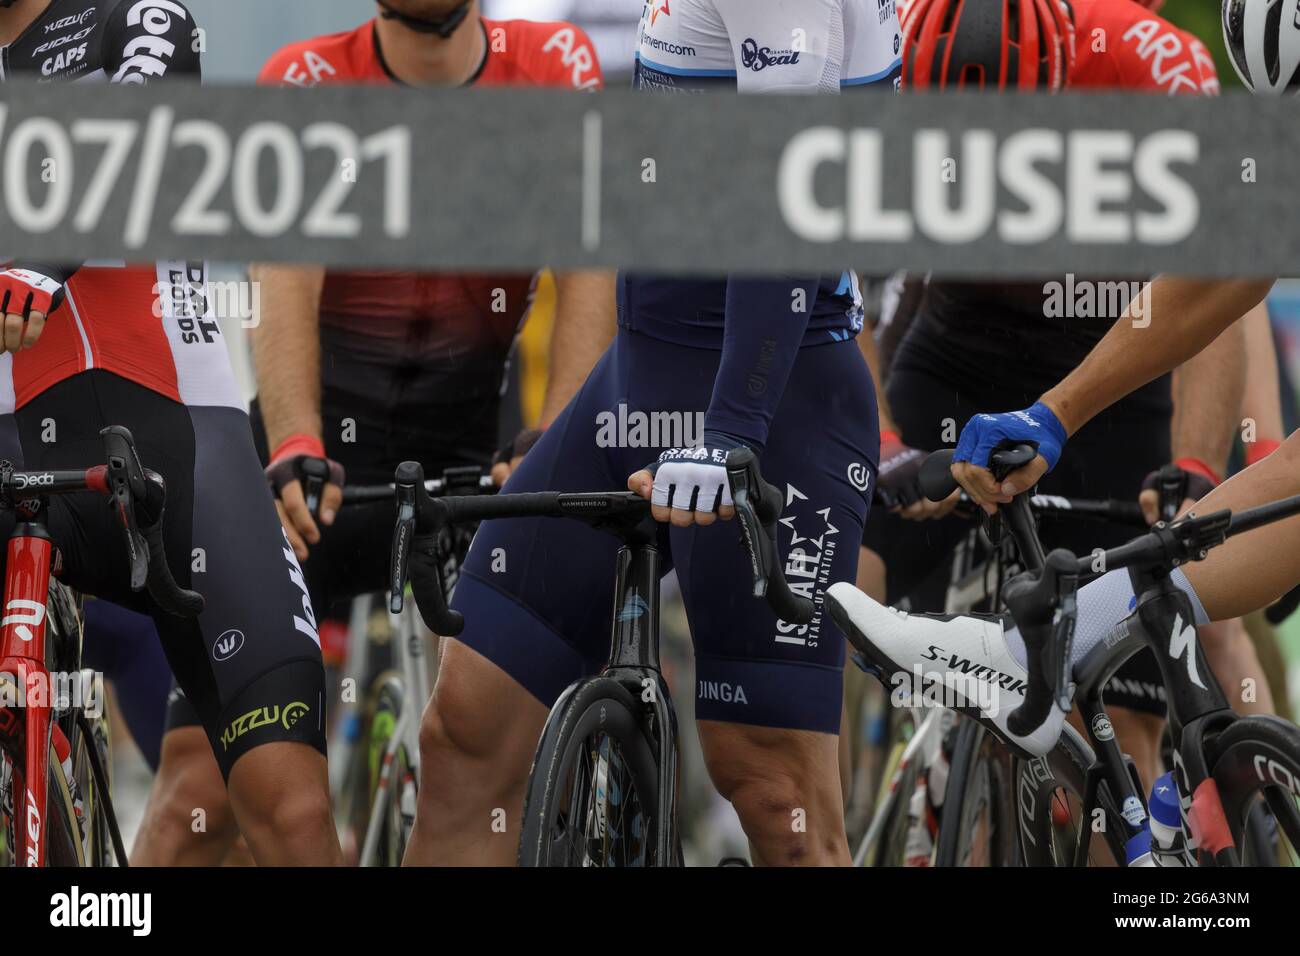 Cluses, France. 04 July 2021. Riders at the beginning of the Tour de France Stage 9 in Cluses, France. Julian Elliott News Photography Credit: Julian Elliott/Alamy Live News Stock Photo